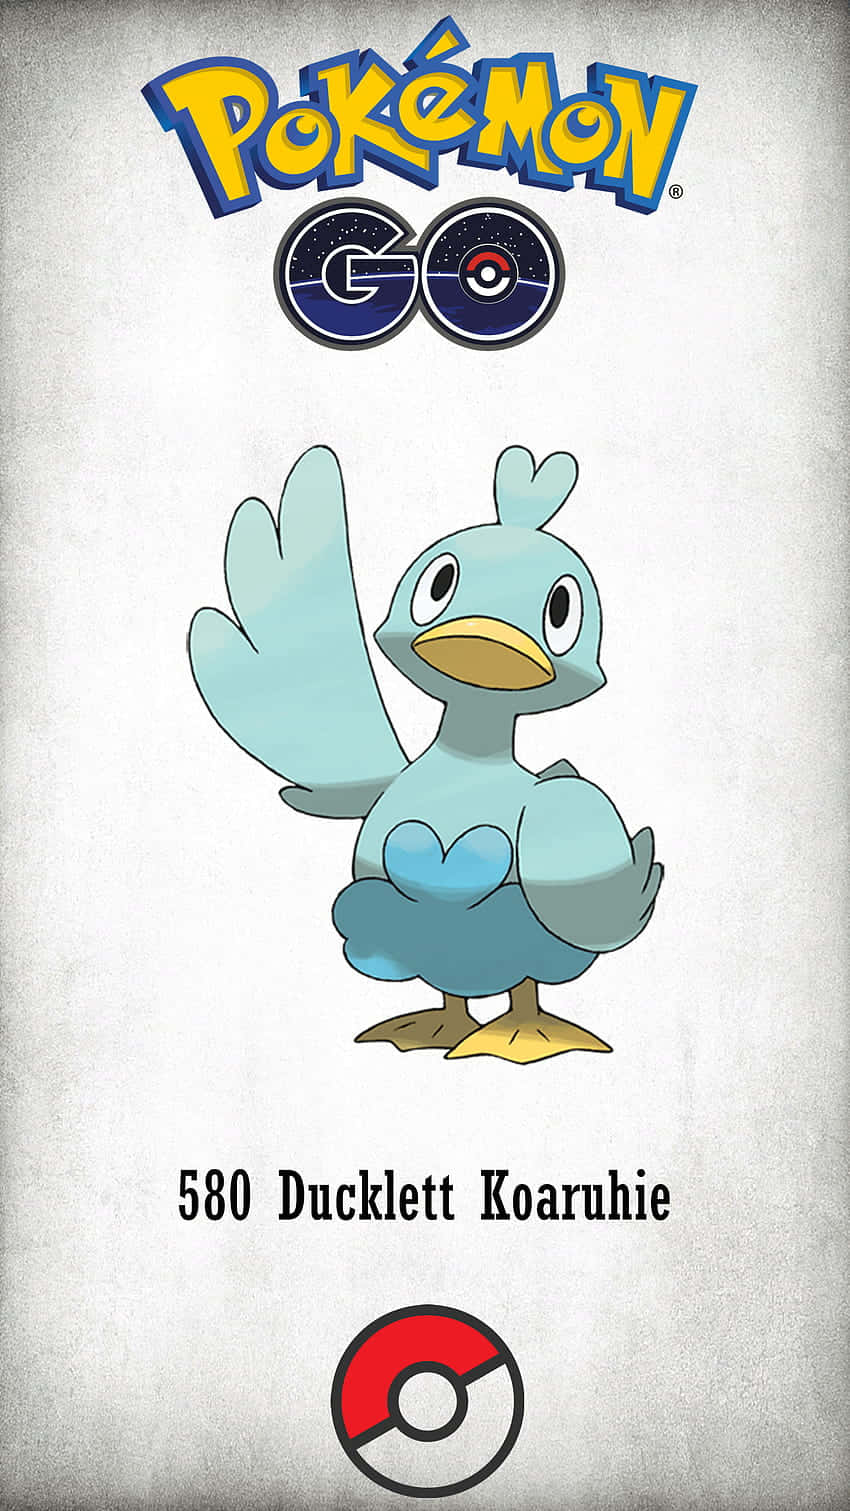 Exciting Image of a Pokemon GO Ducklett Character Wallpaper